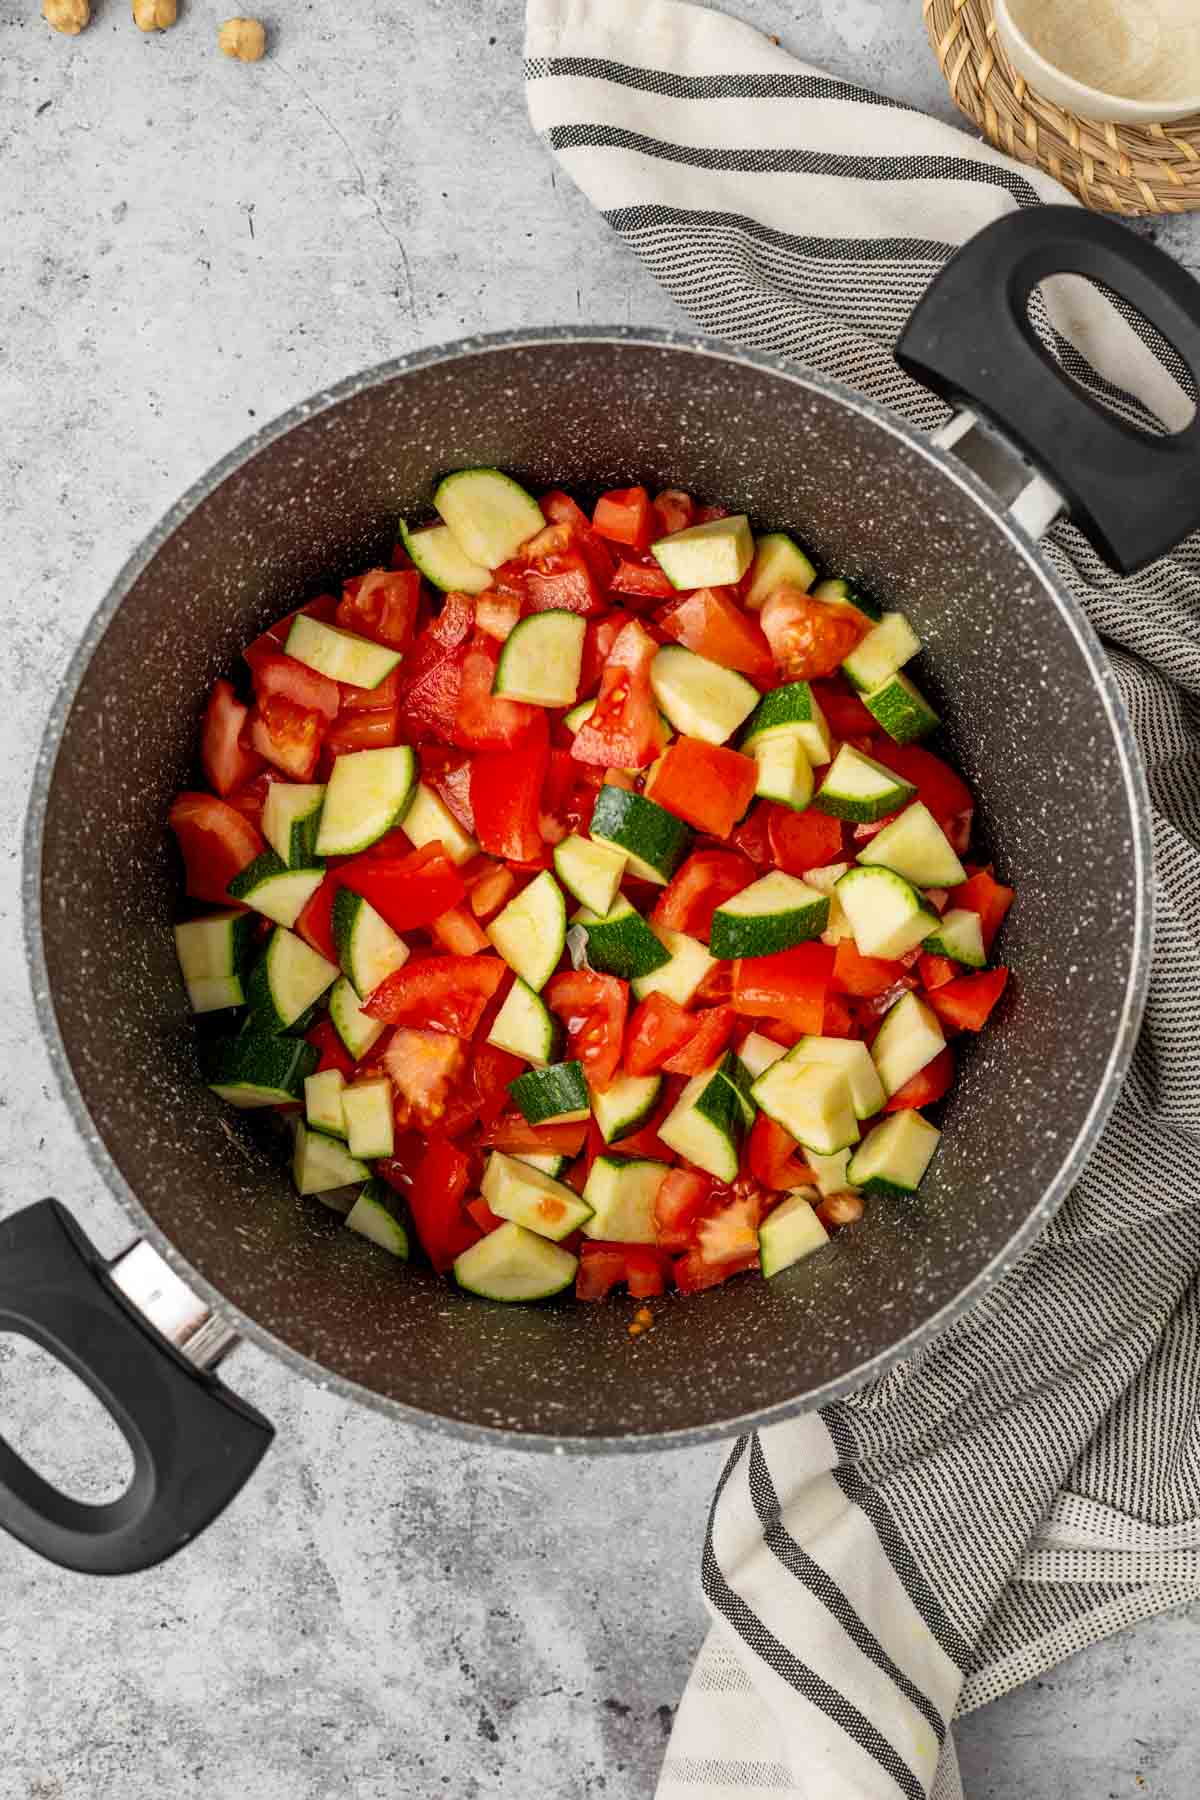 Vegetable soup being made in a pan.